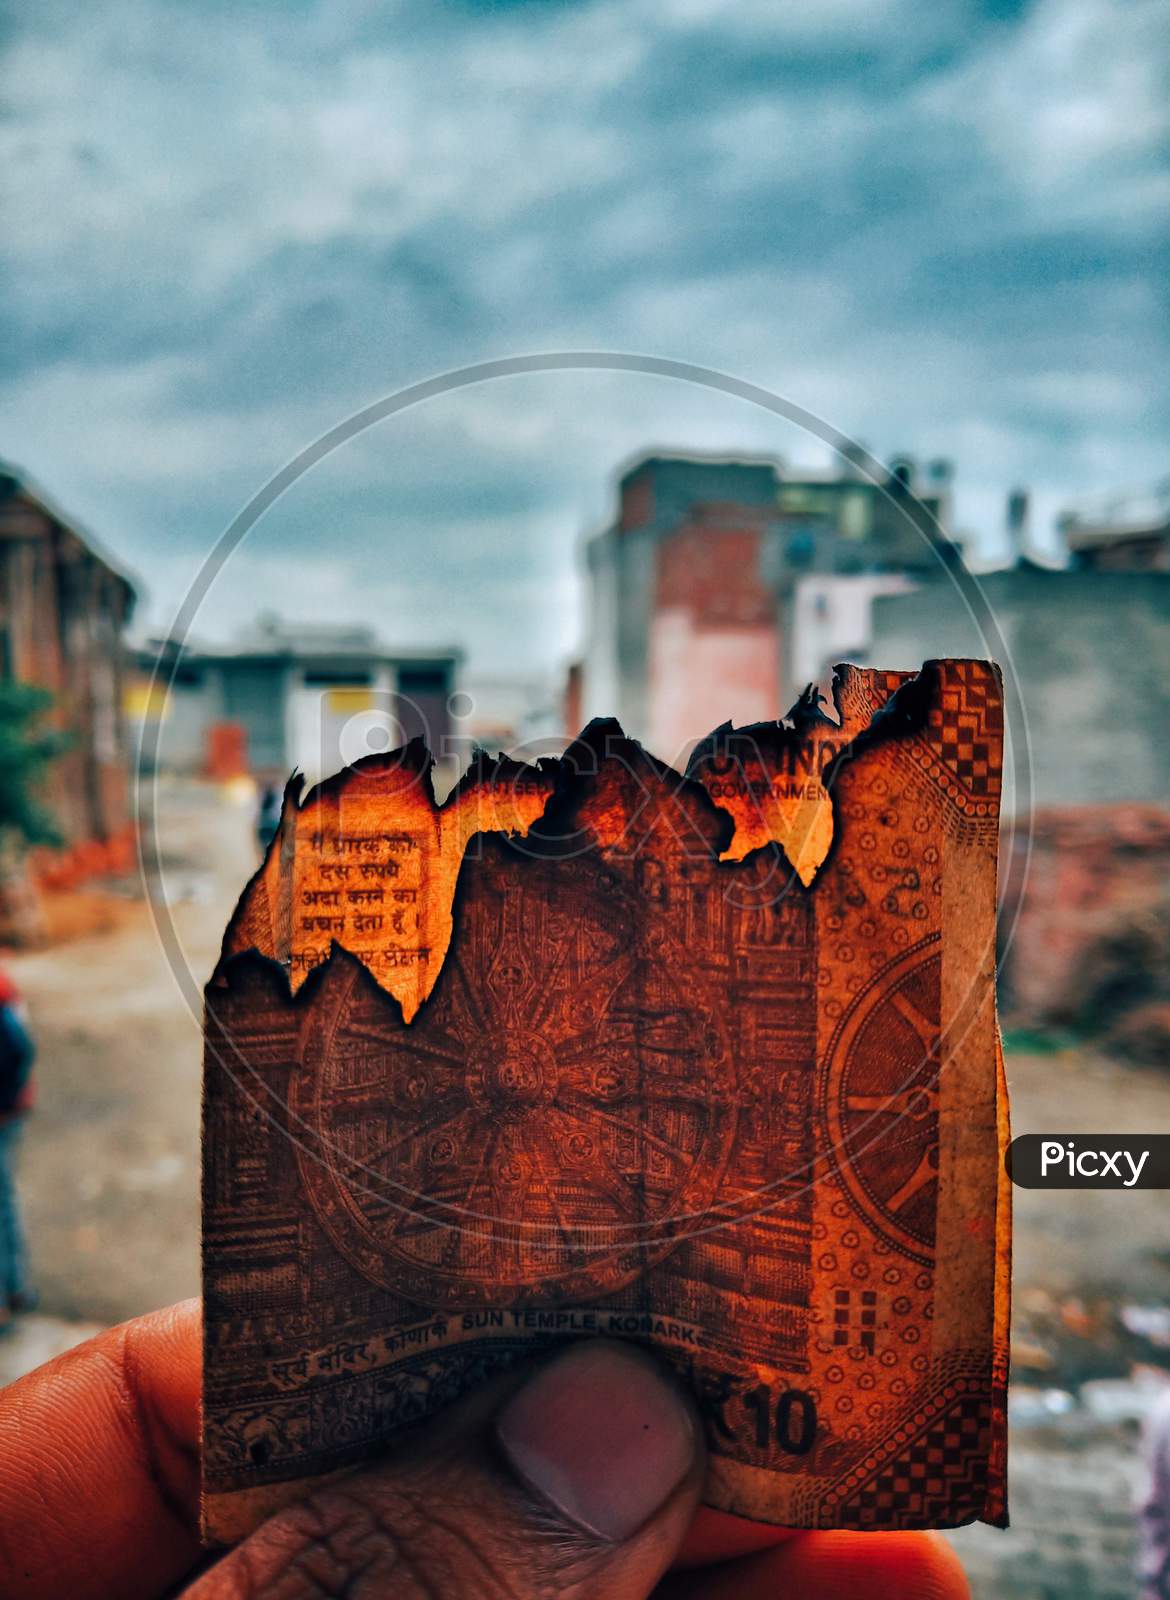 peice of a burning currency , art, creative photography